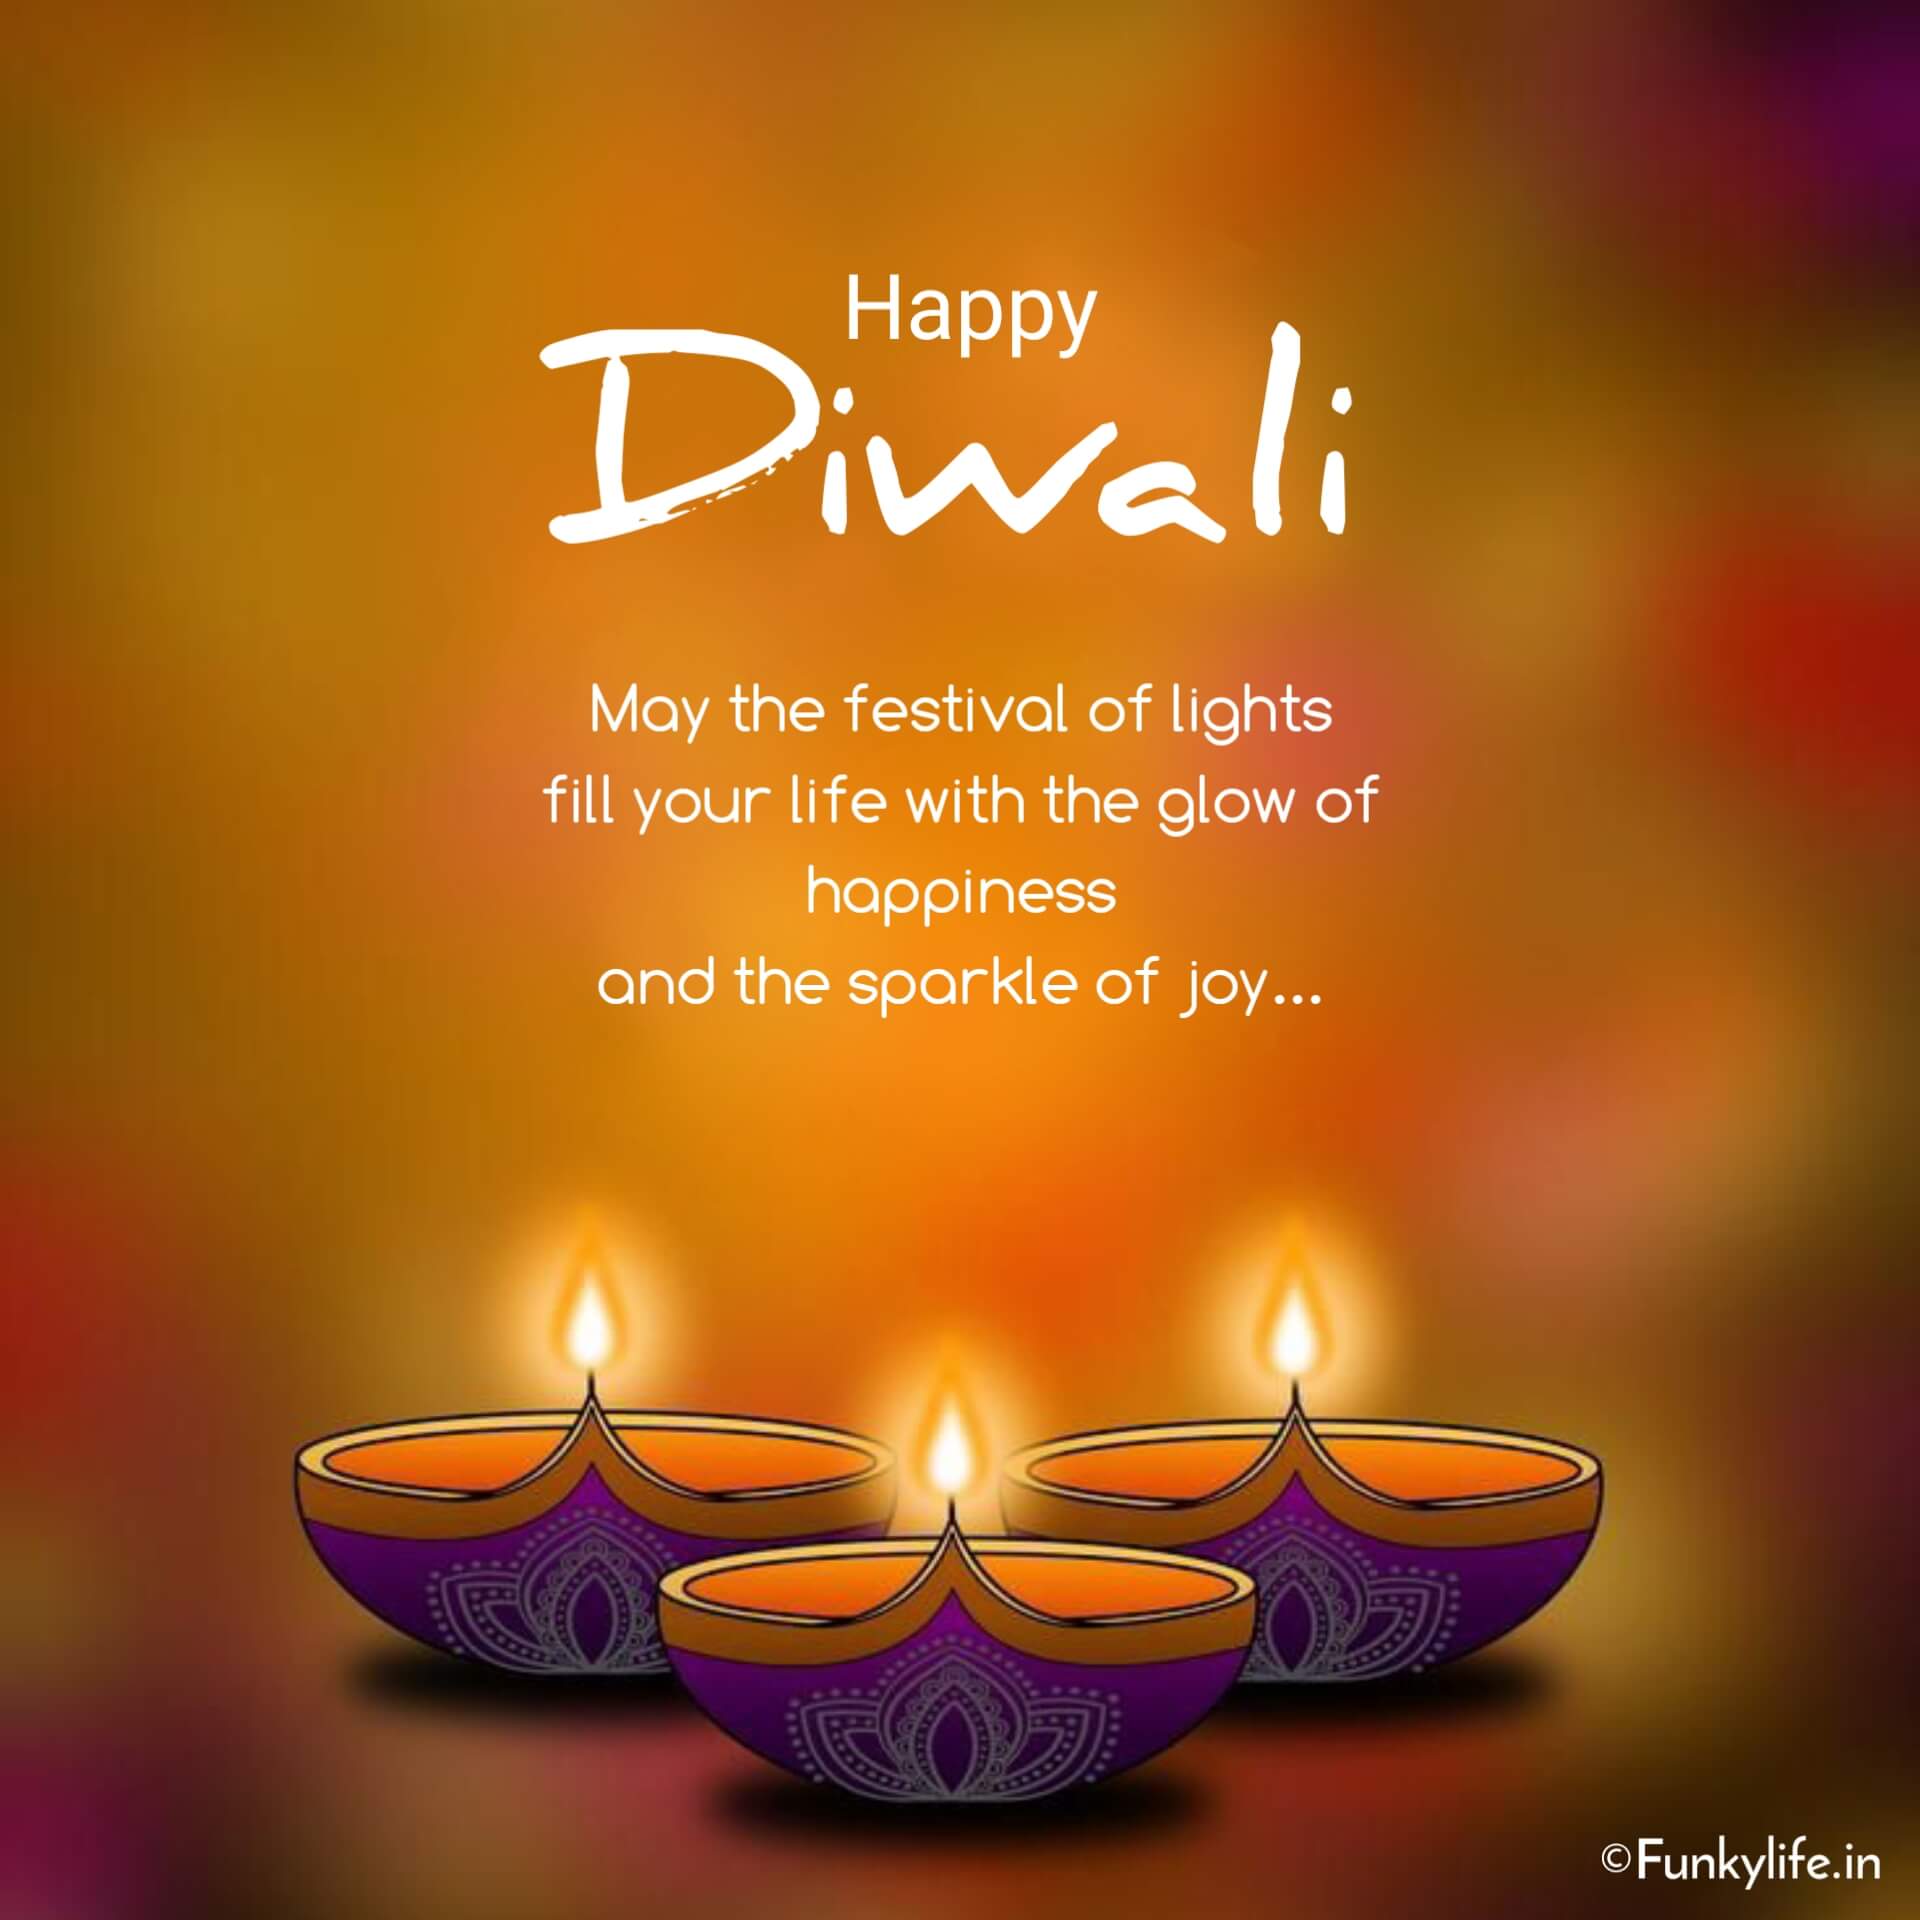 Happy diwali quotes hd wallpapers for mobile 2022  Wallsnapy